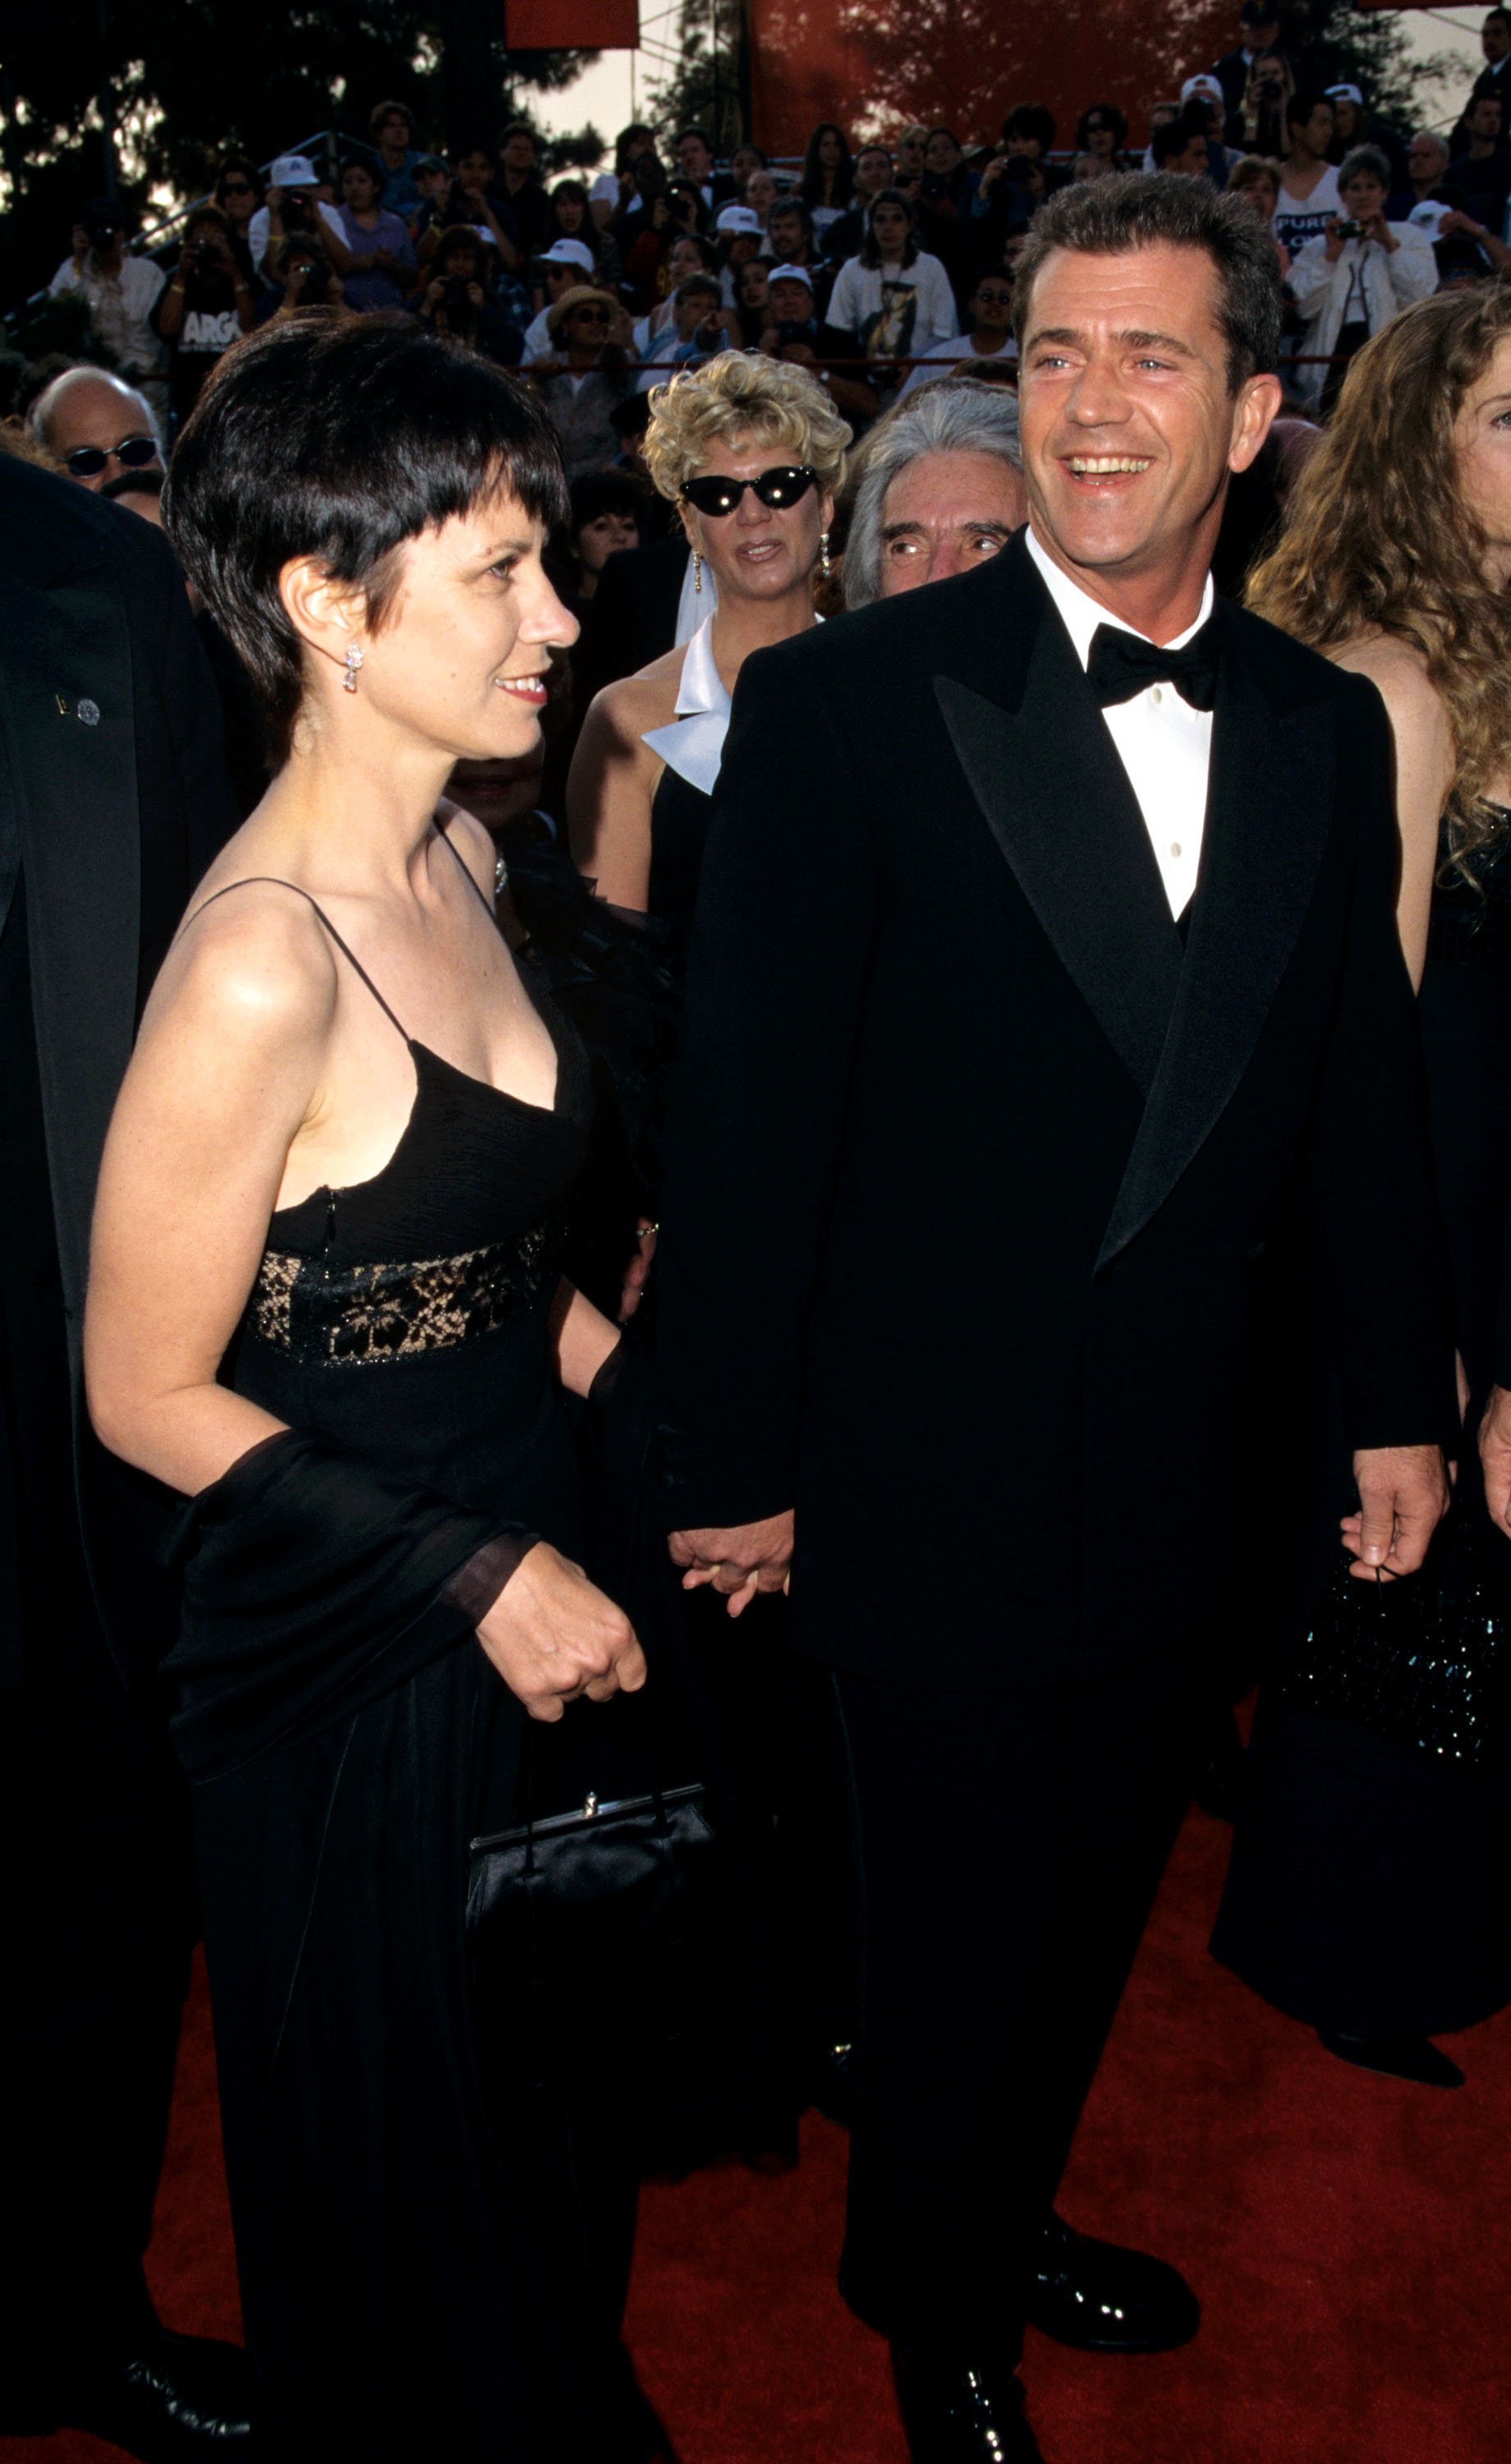 Robyn and Mel Gibson at the 69th Annual Academy Awards in Los Angeles, California, on March 24, 1997 | Source: Getty Images